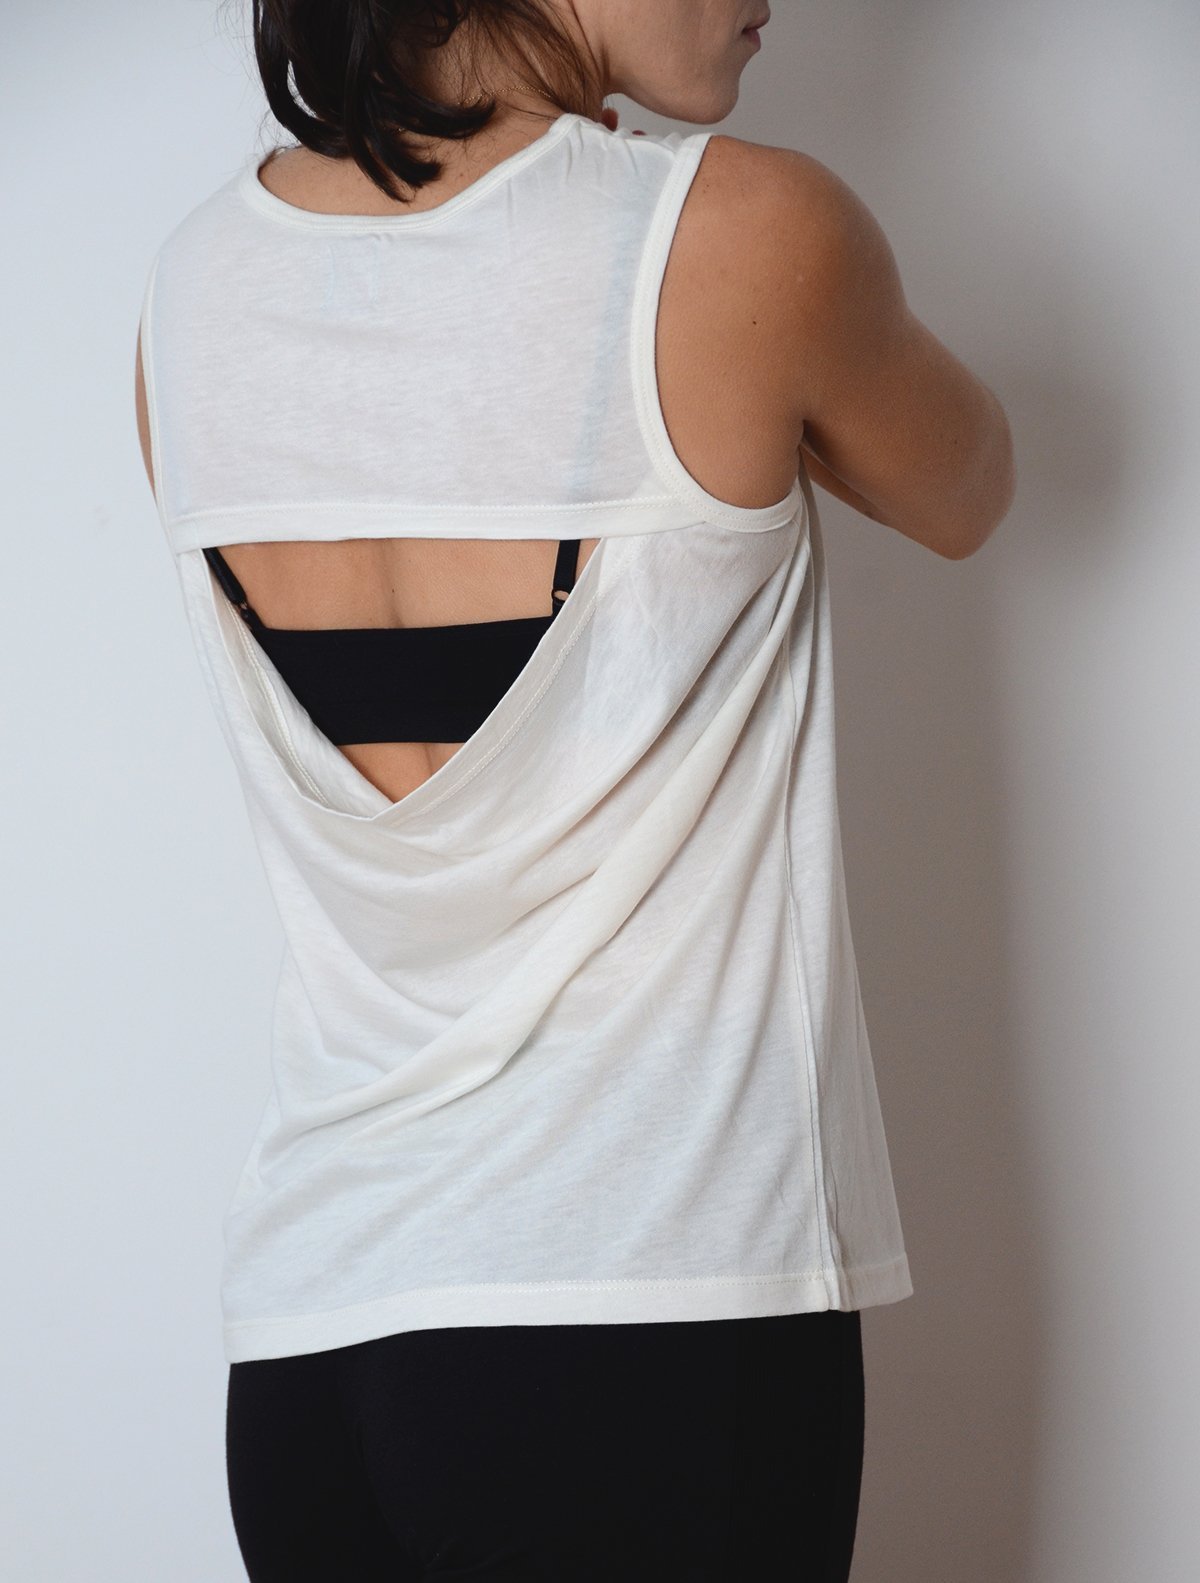 Slightly turned side view of model wearing simulacra's womens organic cotton muscle tank in white